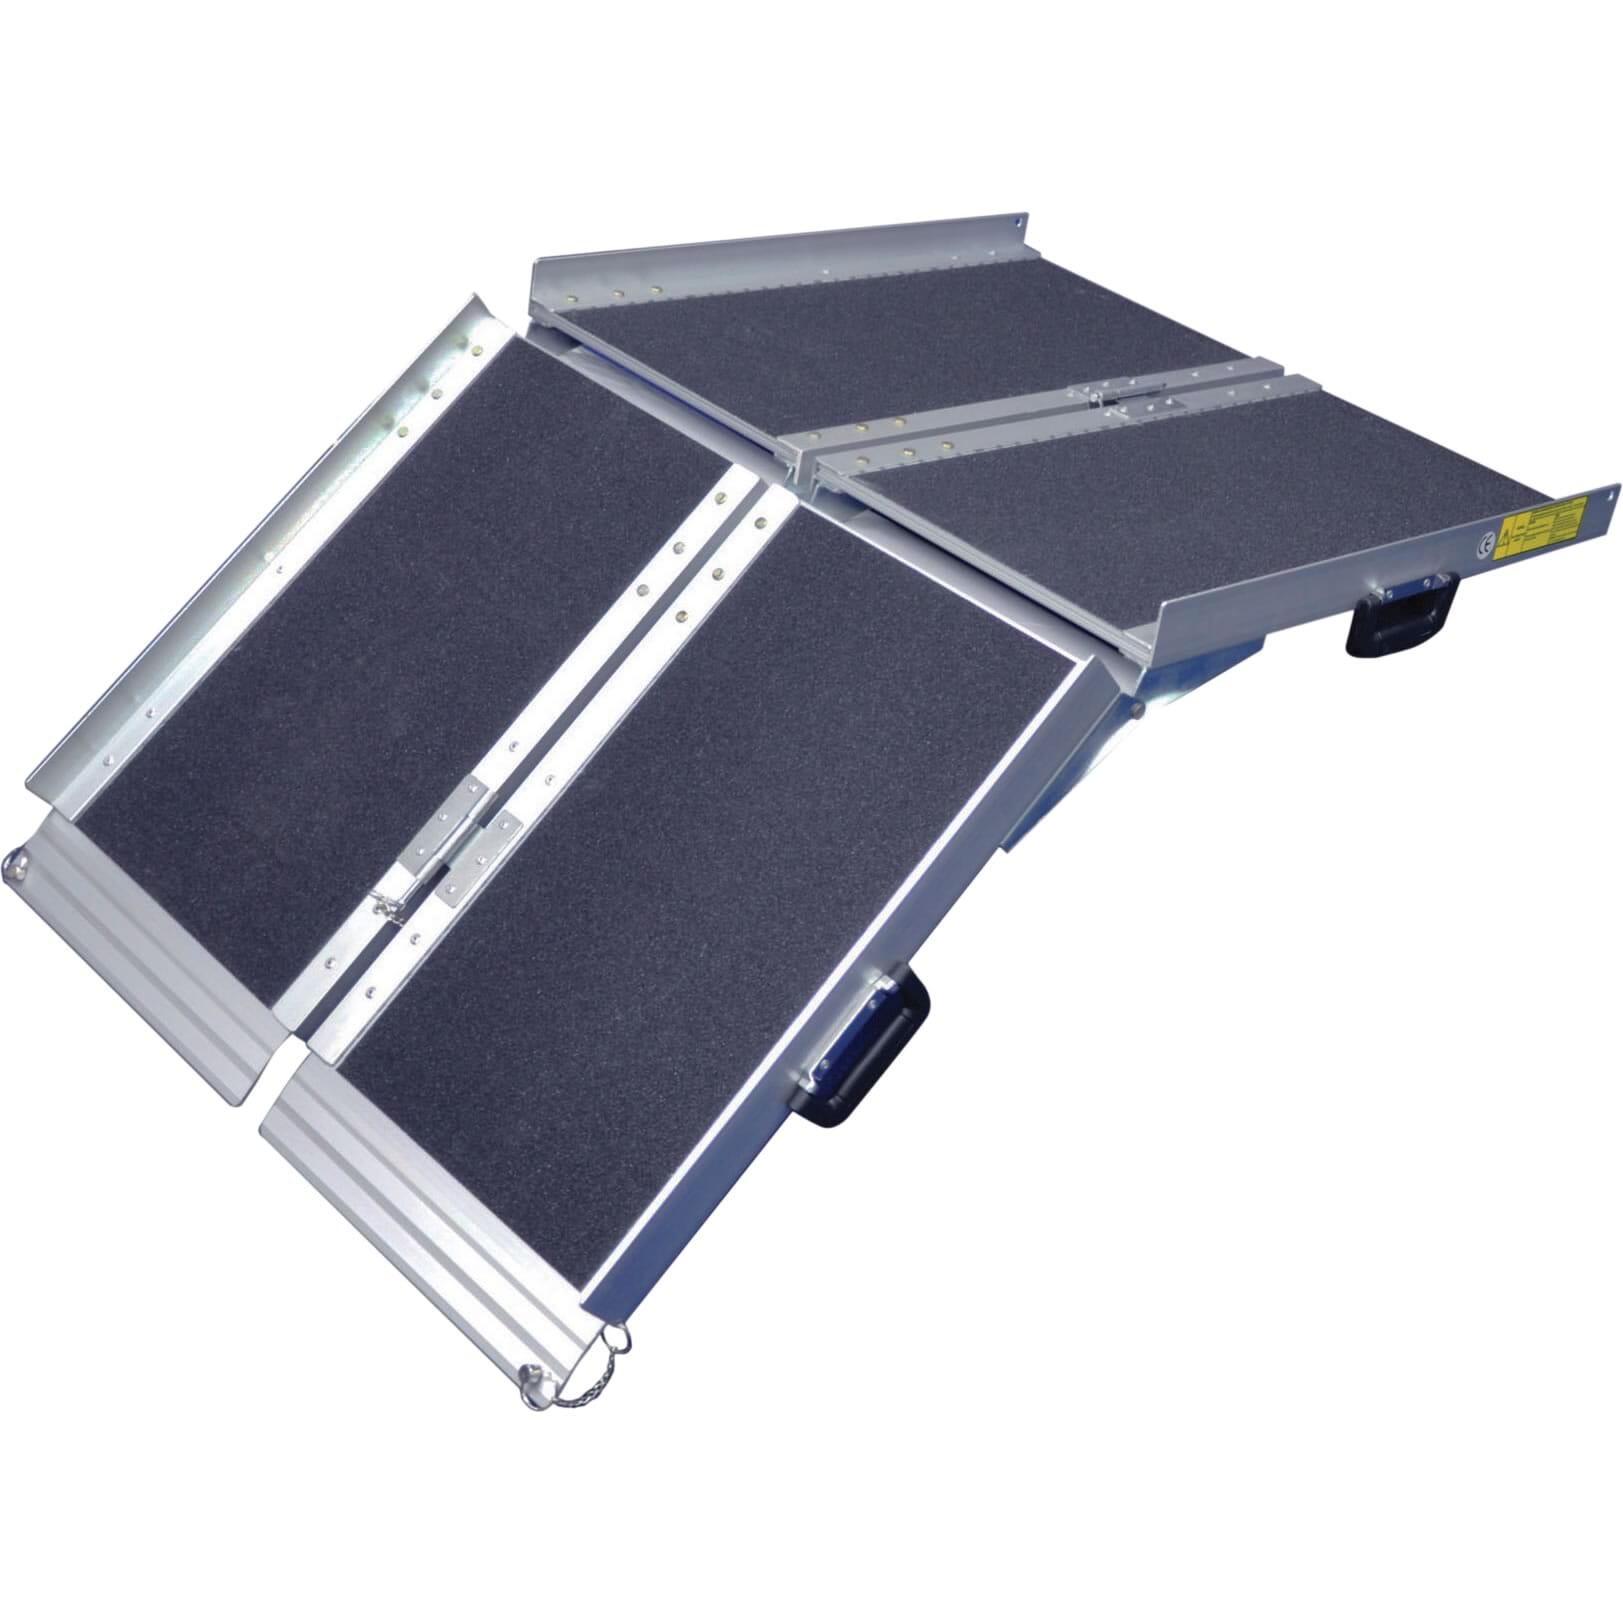 View Multifold Economy Wheelchair Ramps with Grip Surface 4ft 1220mm information